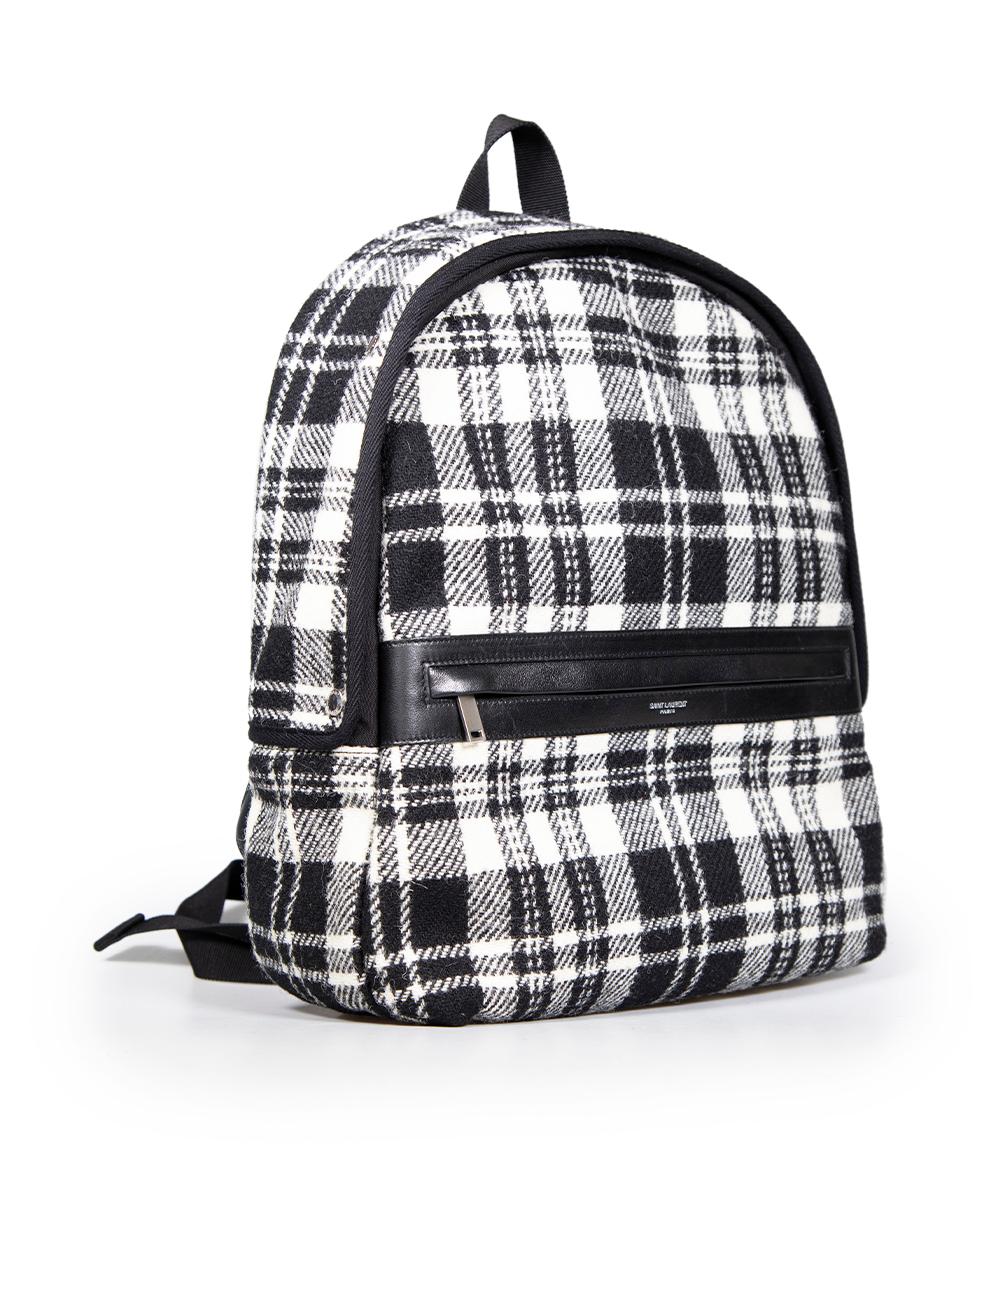 CONDITION is Never worn, with tags. No visible wear to bag is evident on this new Saint Laurent designer resale item. This item comes with original dust bag.
 
 
 
 Details
 
 
 City model
 
 Black
 
 Wool
 
 Medium backpack
 
 Tartan pattern
 
 1x